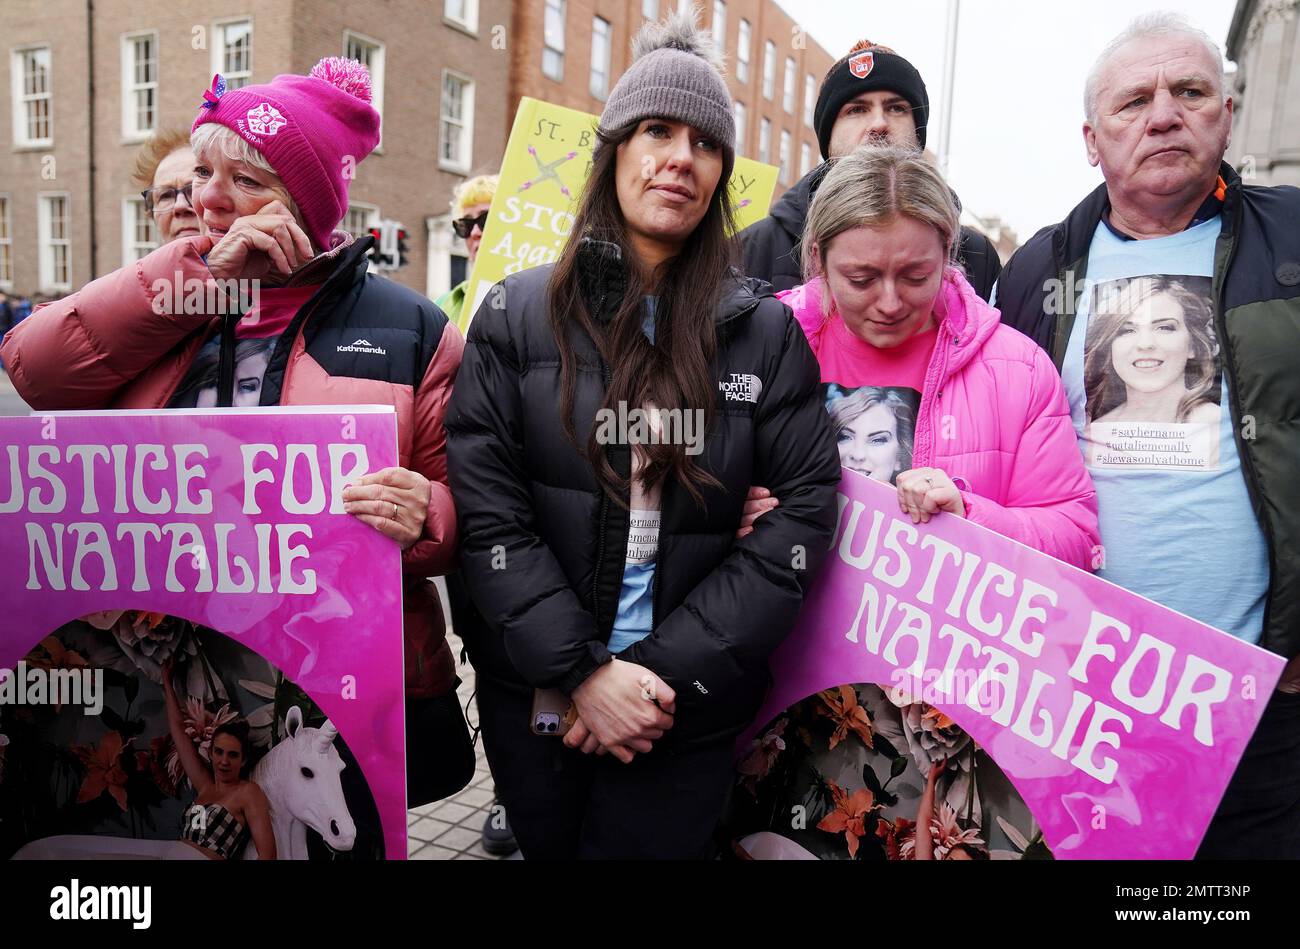 Family members of murder victim Natalie McNally Gemma Doran (centre), Bernie McNally (left) and Hollie Donnelly (second right) attend a St Brigid's Day rally outside Leinster House, Dublin, calling on the Government to take action in addressing violence against women in Ireland. The rally was held to coincide with St Brigid’s Day, with speakers asking that women be protected in the spirit of the Celtic goddess and Christian saint Brigid, who is associated with healing. Picture date: Wednesday February 1, 2023. Stock Photo